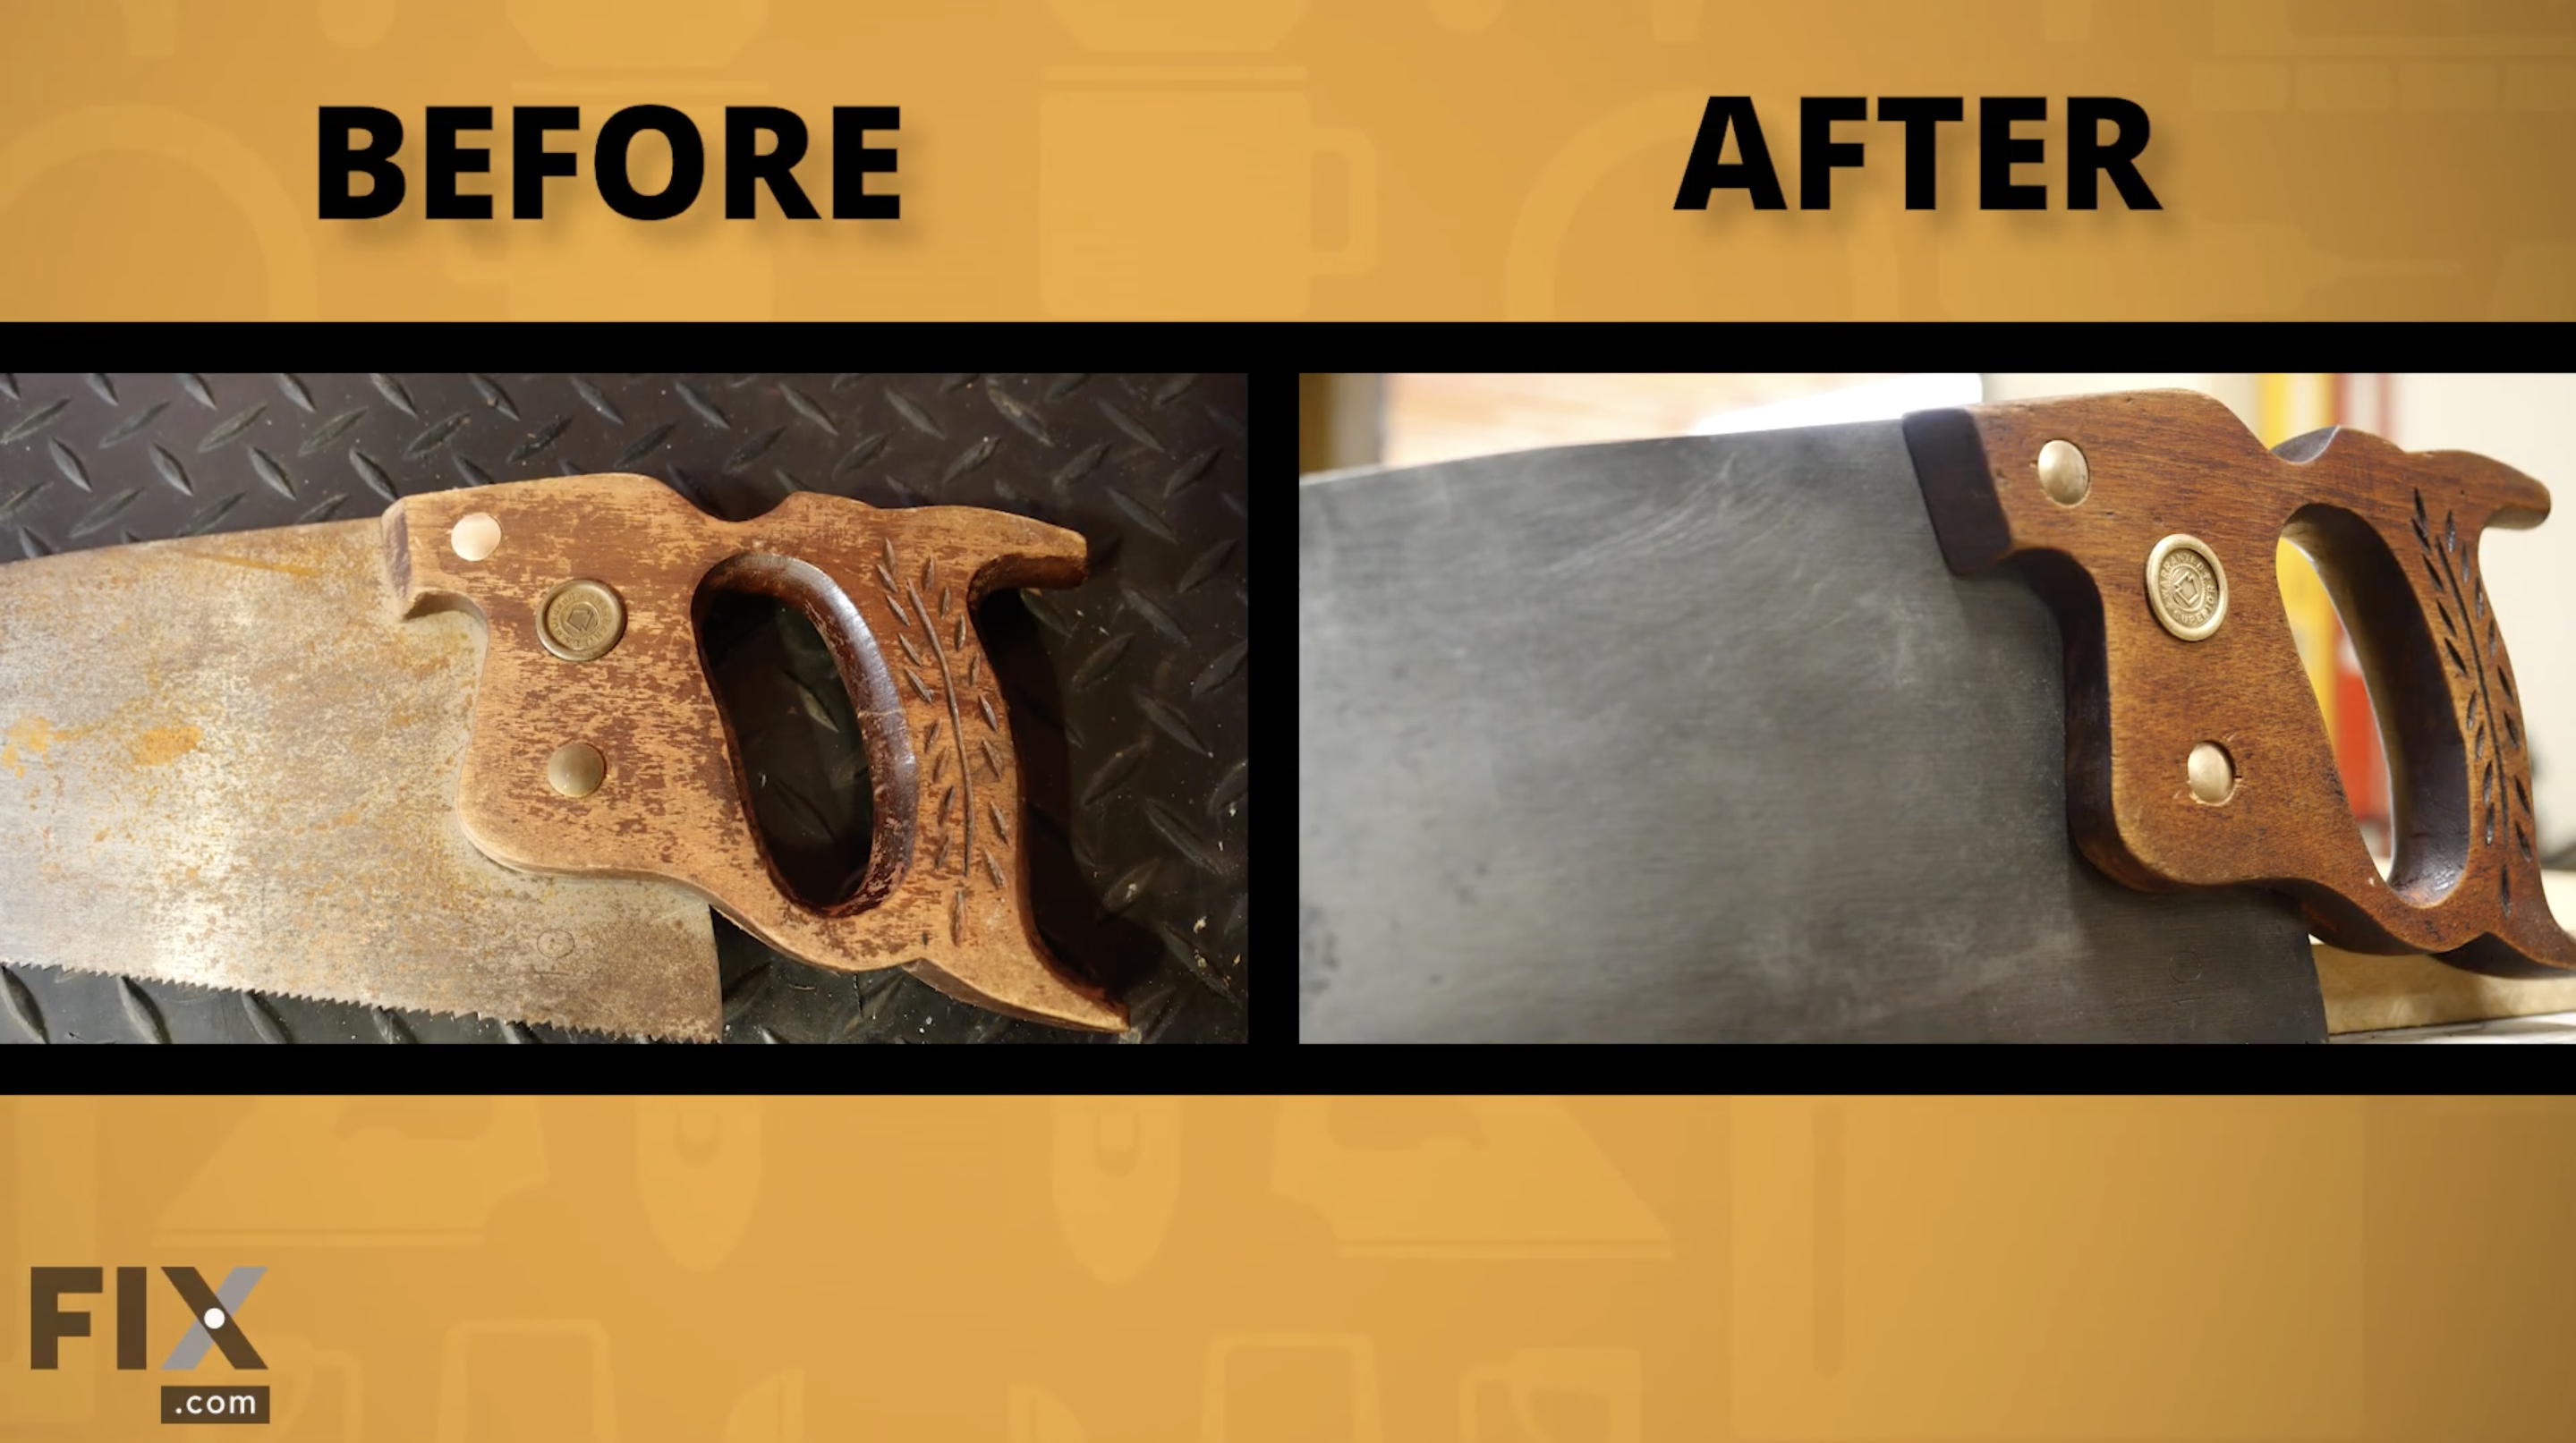 Before and after the restoration - you can see how dramatic of a change this restoration this is on the hand saw and tools.